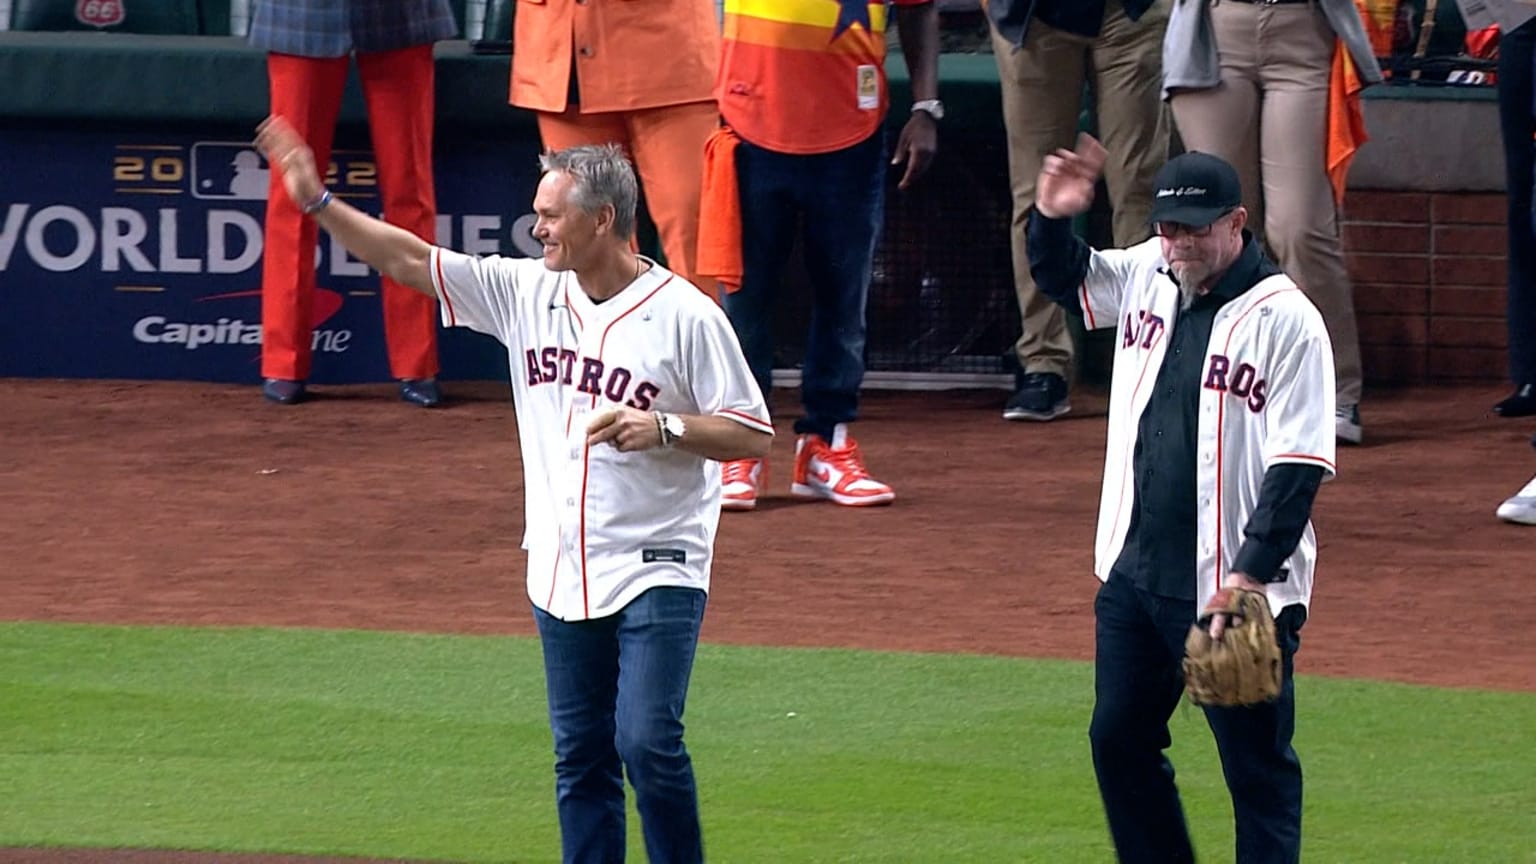 Craig Biggio elected to Baseball Hall of Fame, Jeff Bagwell left out again  - The Crawfish Boxes